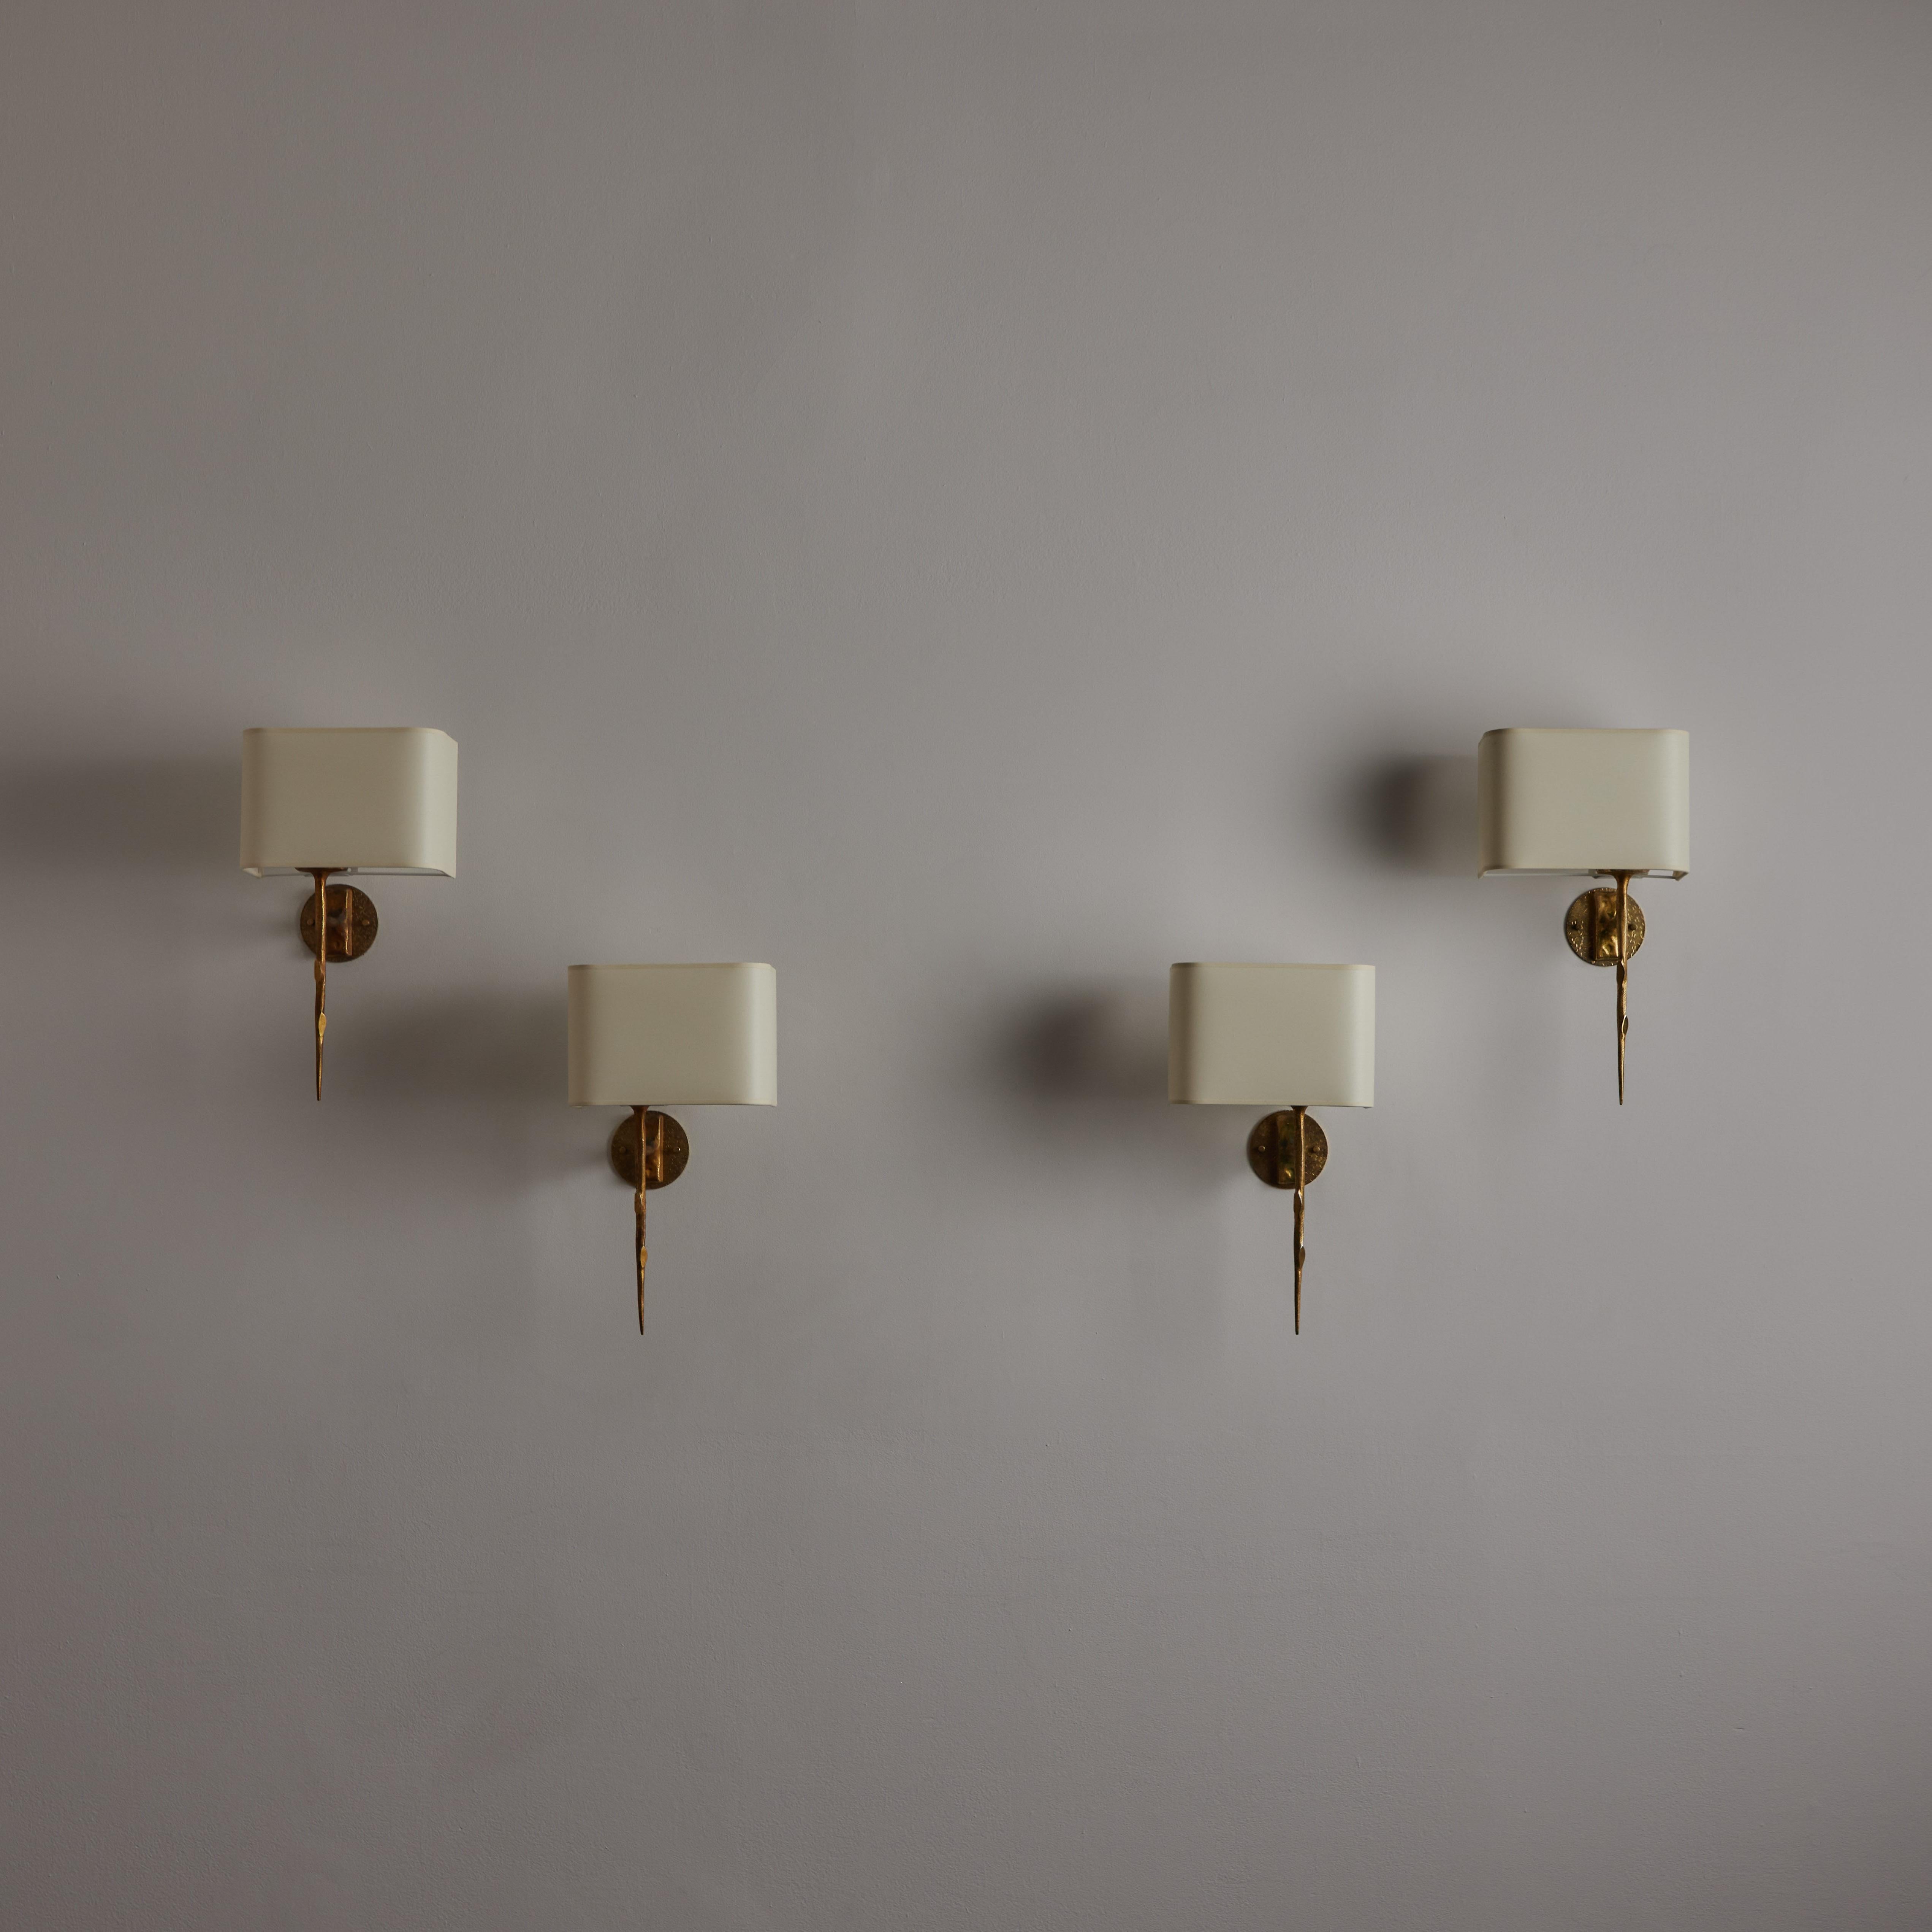 Gilded bronze sconces by Maison Arlus. Designed and manufactured in France, Circa the 1960s. Hammered casted brass armatures paired with linen rectangle shades. The shades are mounted on a slider track which allows user to move the shade from left